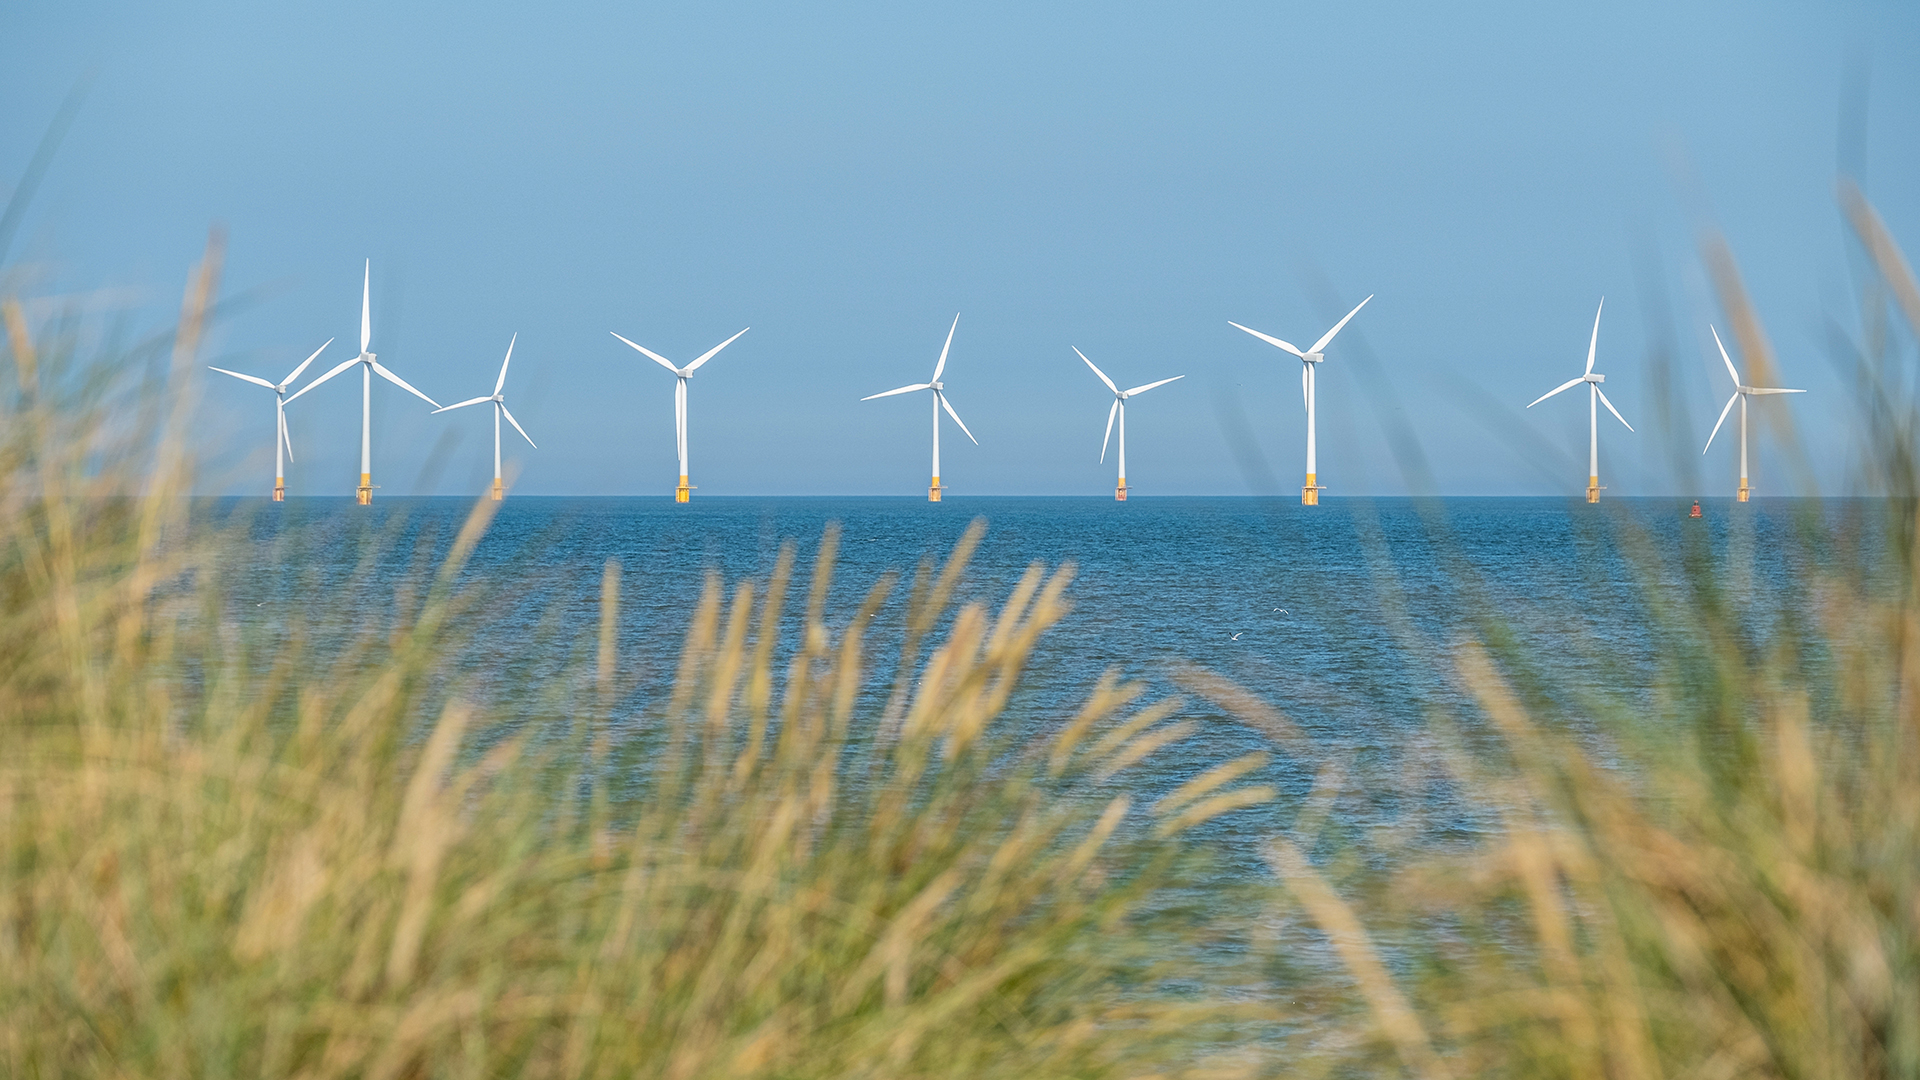 Scroby Sands Wind Farm Located in the North Sea off Norfolk Coast